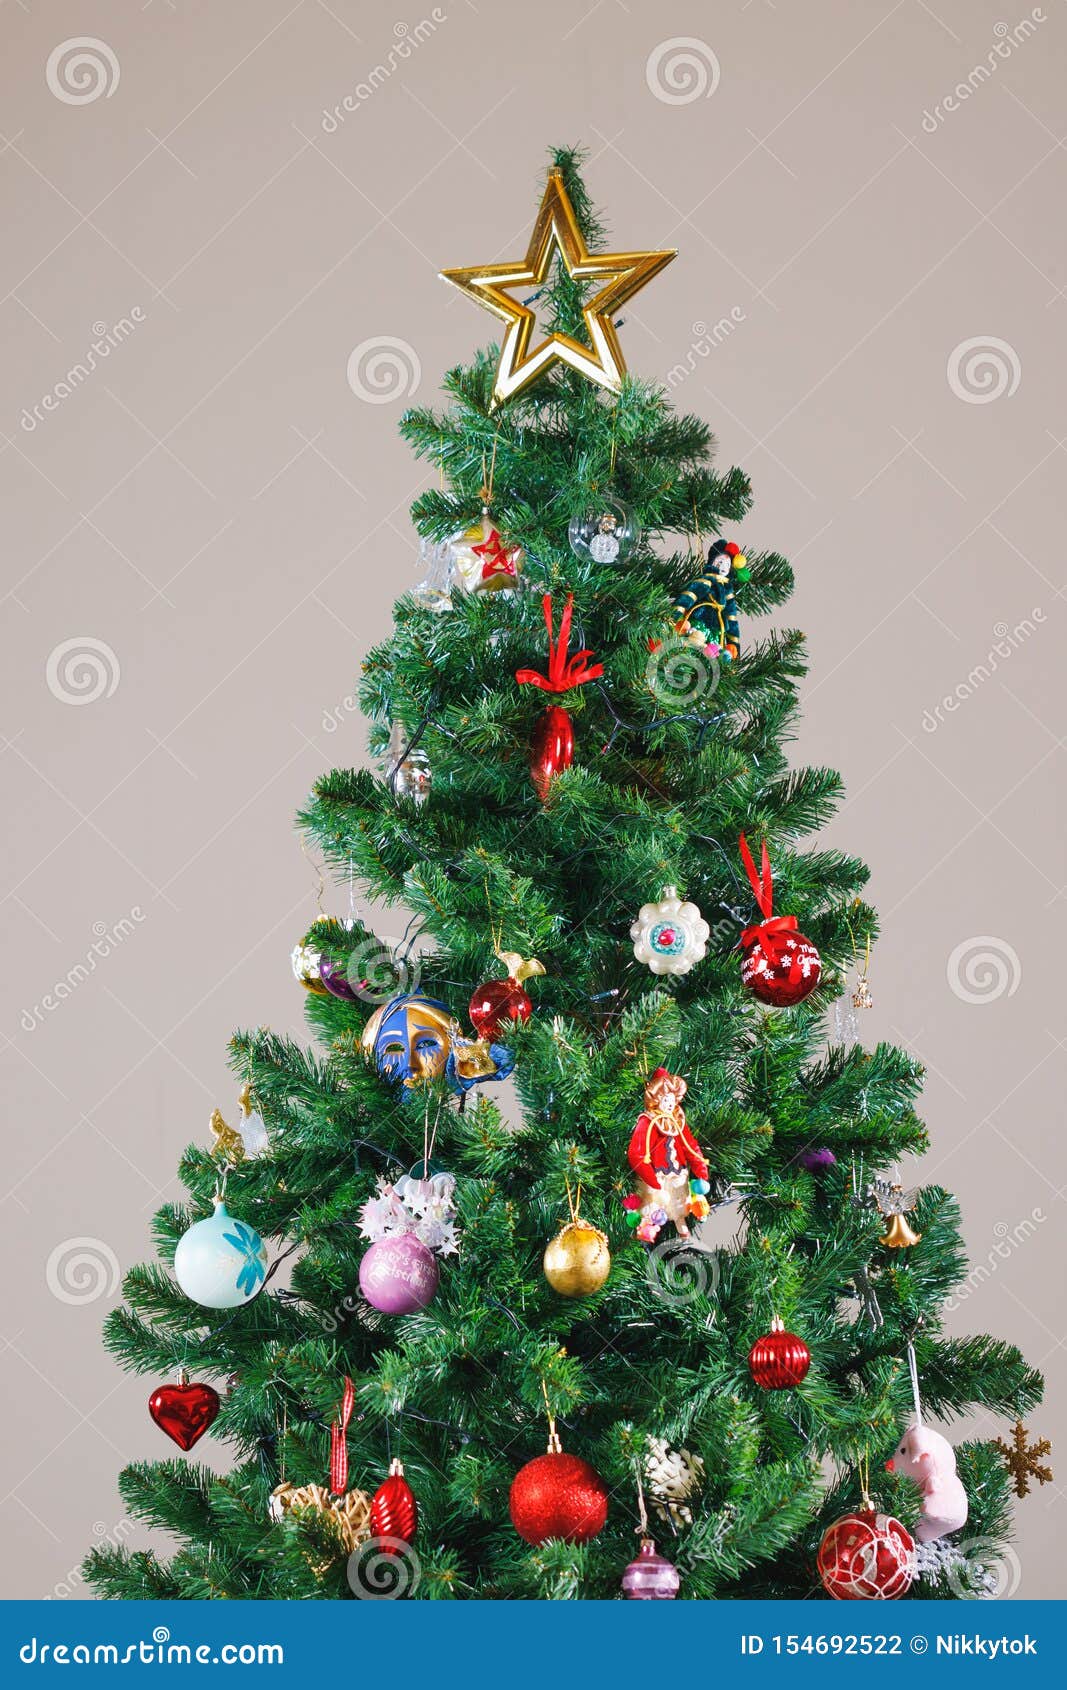 Christmas Tree with Gold Star and Decorations Stock Photo - Image of ...